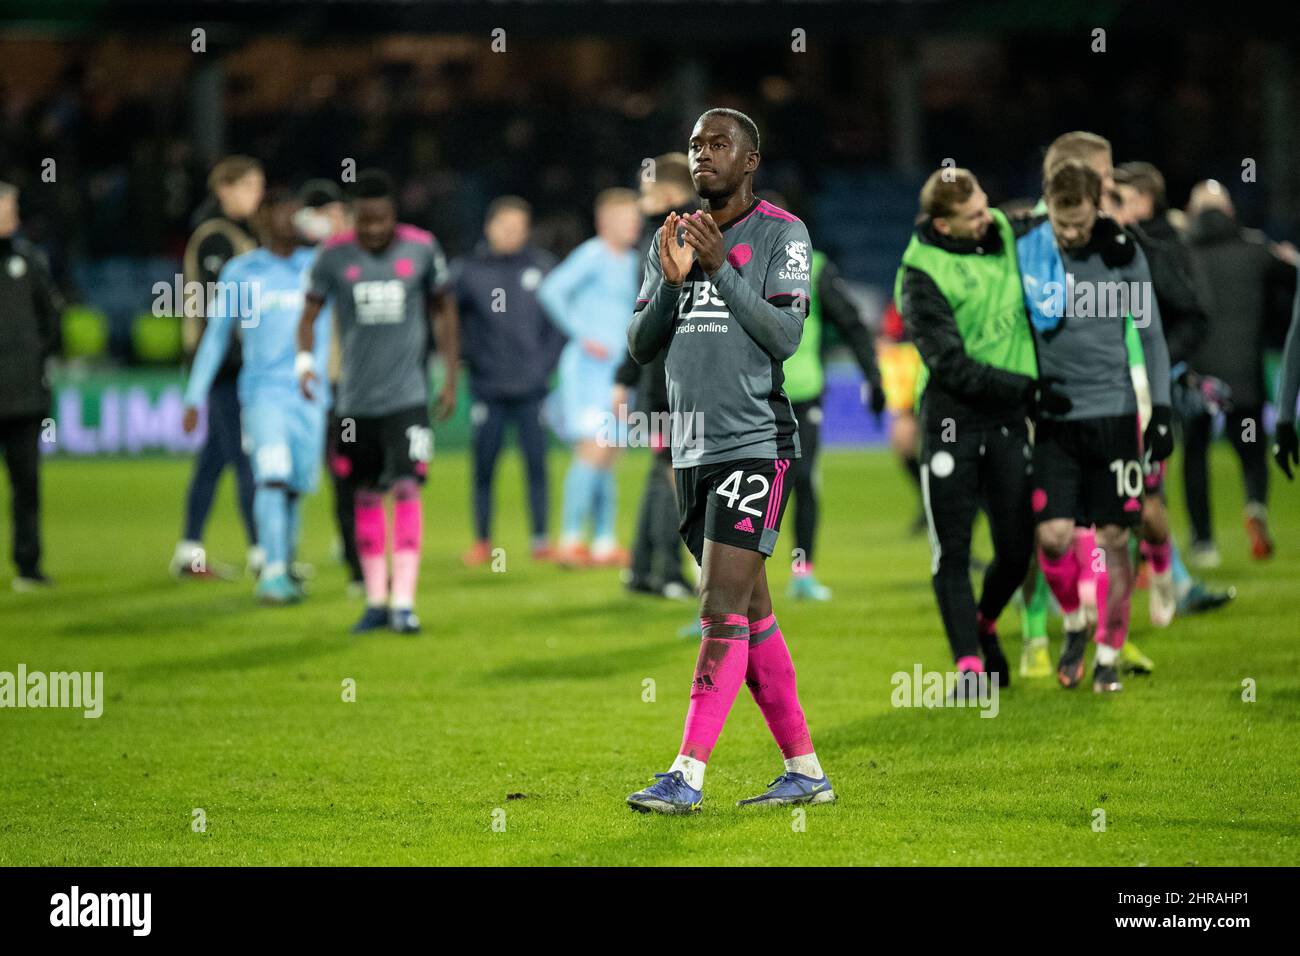 Randers, Denmark. 24th, February 2022. Boubakary Soumare (42) of Leicester City seen after the UEFA Europa Conference League match between Randers FC and Leicester City at Cepheus Park in Randers. (Photo credit: Gonzales Photo - Balazs Popal). Stock Photo